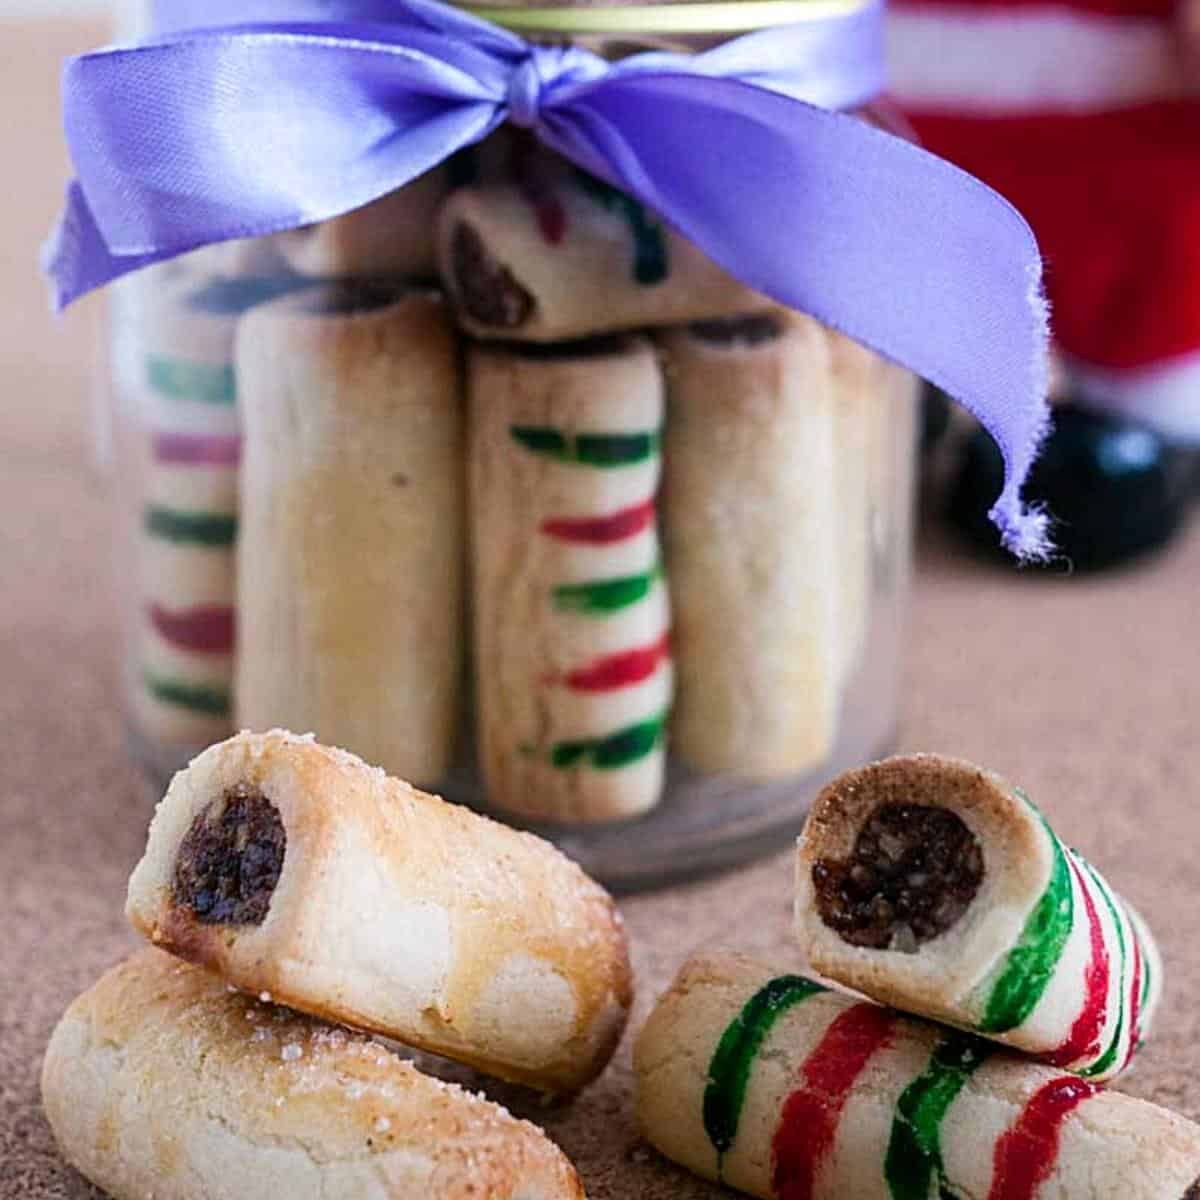 Date and nut cookies as gift for the holidays.